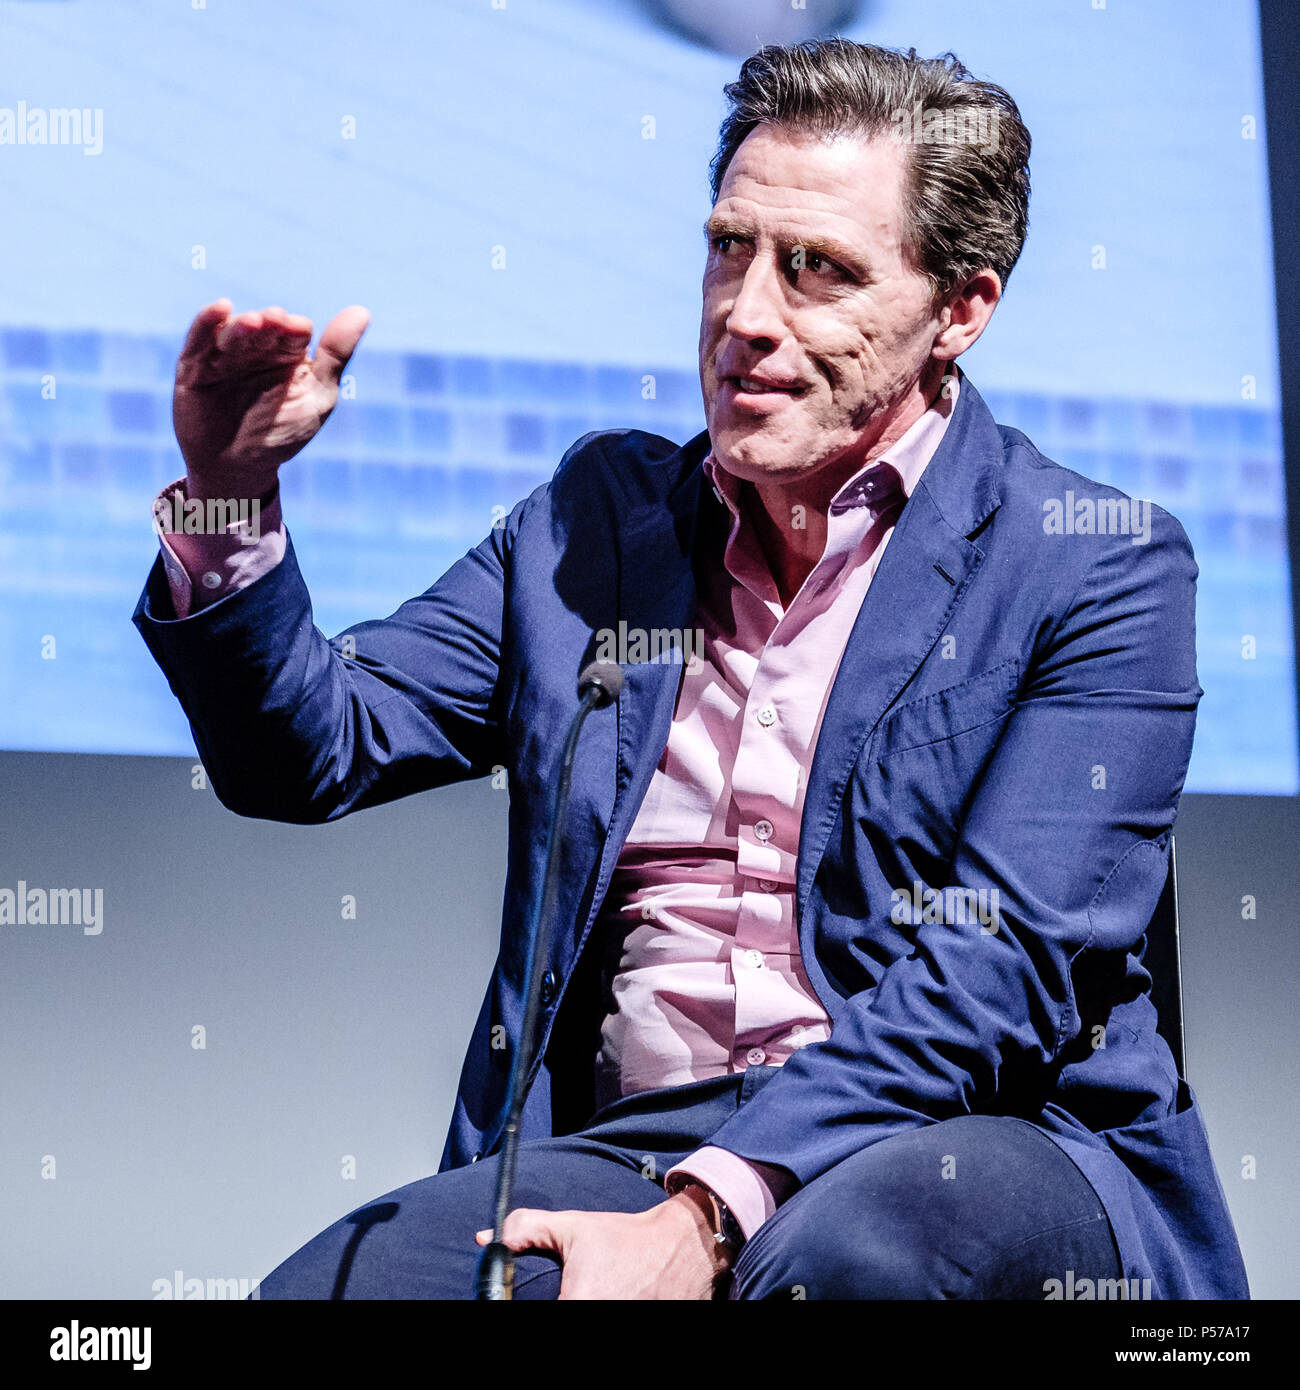 London, UK. 25th June, 2018. London, UK. 25th June, 2018. Rob Brydon appears on Mark Kermode Live in 3D on Monday 25 June 2018 held at BFI Southbank, London. Pictured: Rob Brydon. Credit: Julie Edwards/Alamy Live News Stock Photo